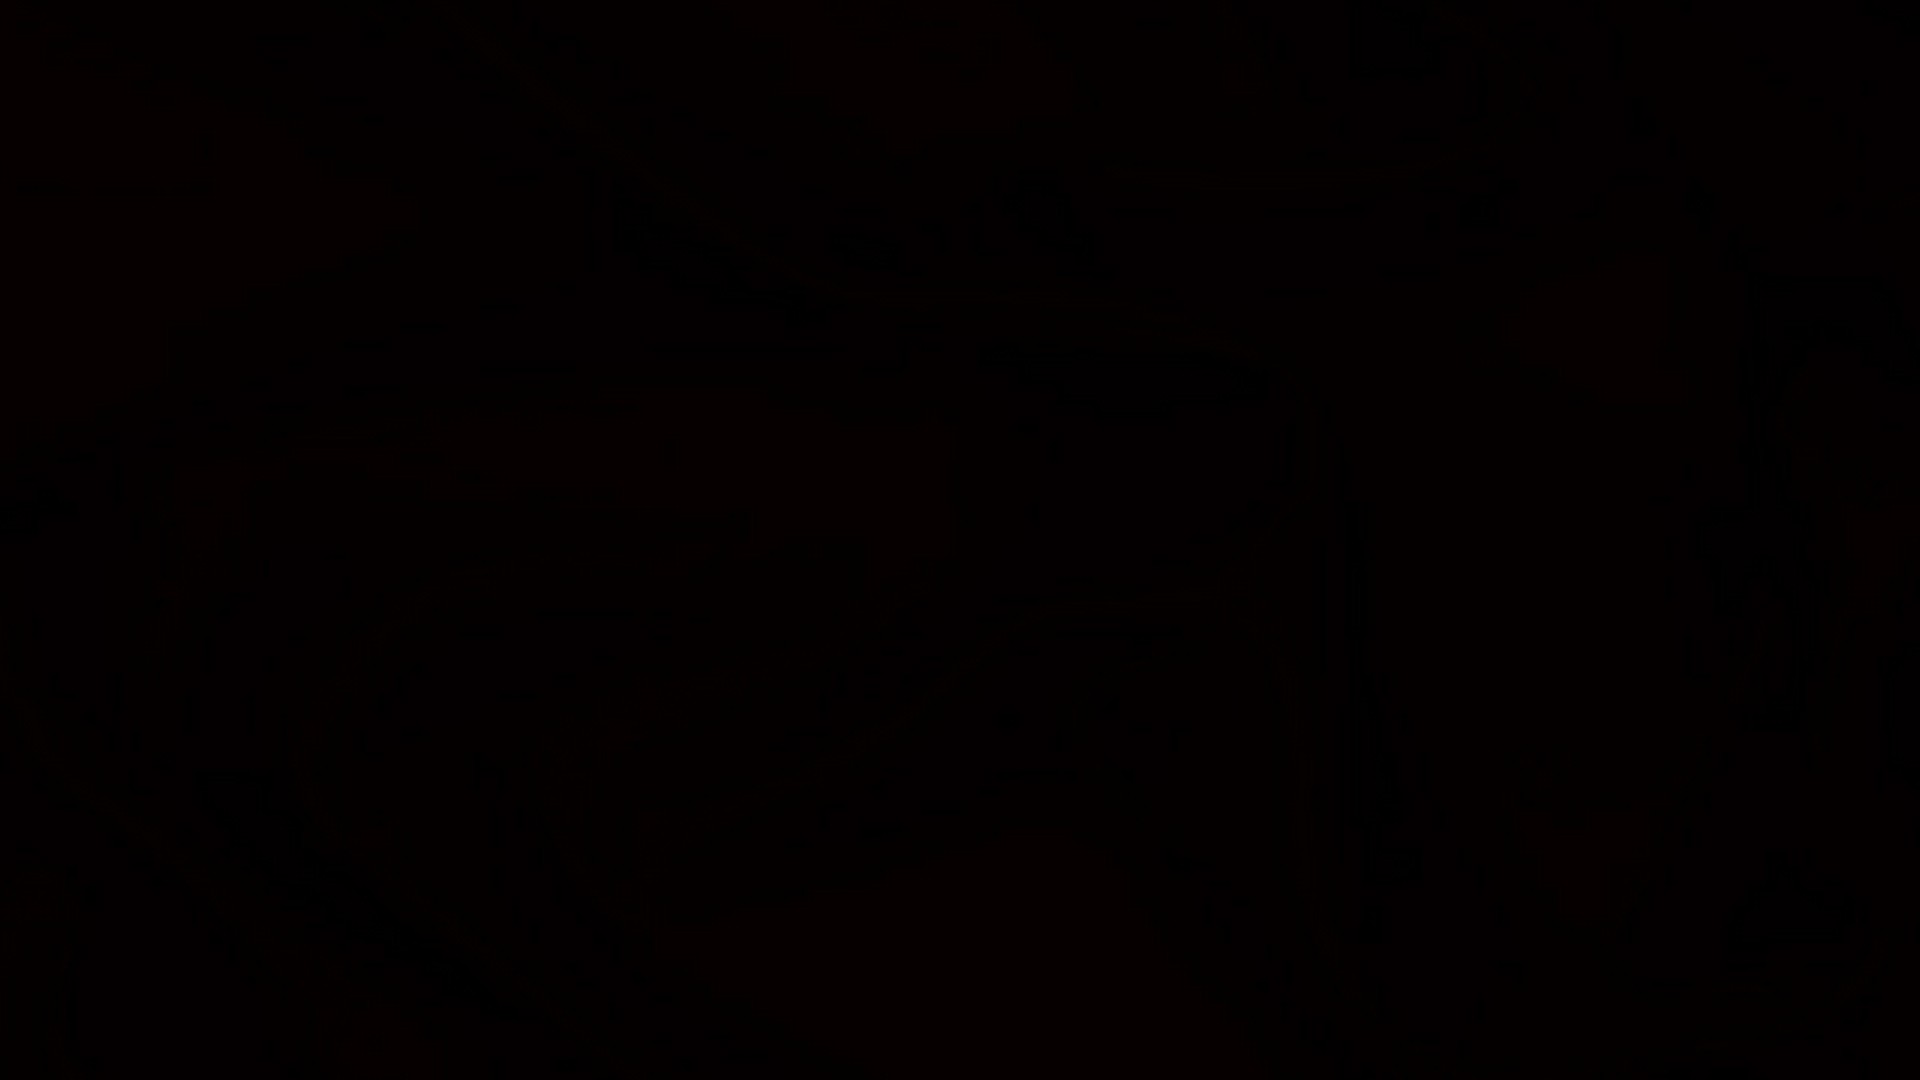 Wallpaper Plain Black HD With high-resolution 1920X1080 pixel. You can use this wallpaper for your Desktop Computer Backgrounds, Mac Wallpapers, Android Lock screen or iPhone Screensavers and another smartphone device